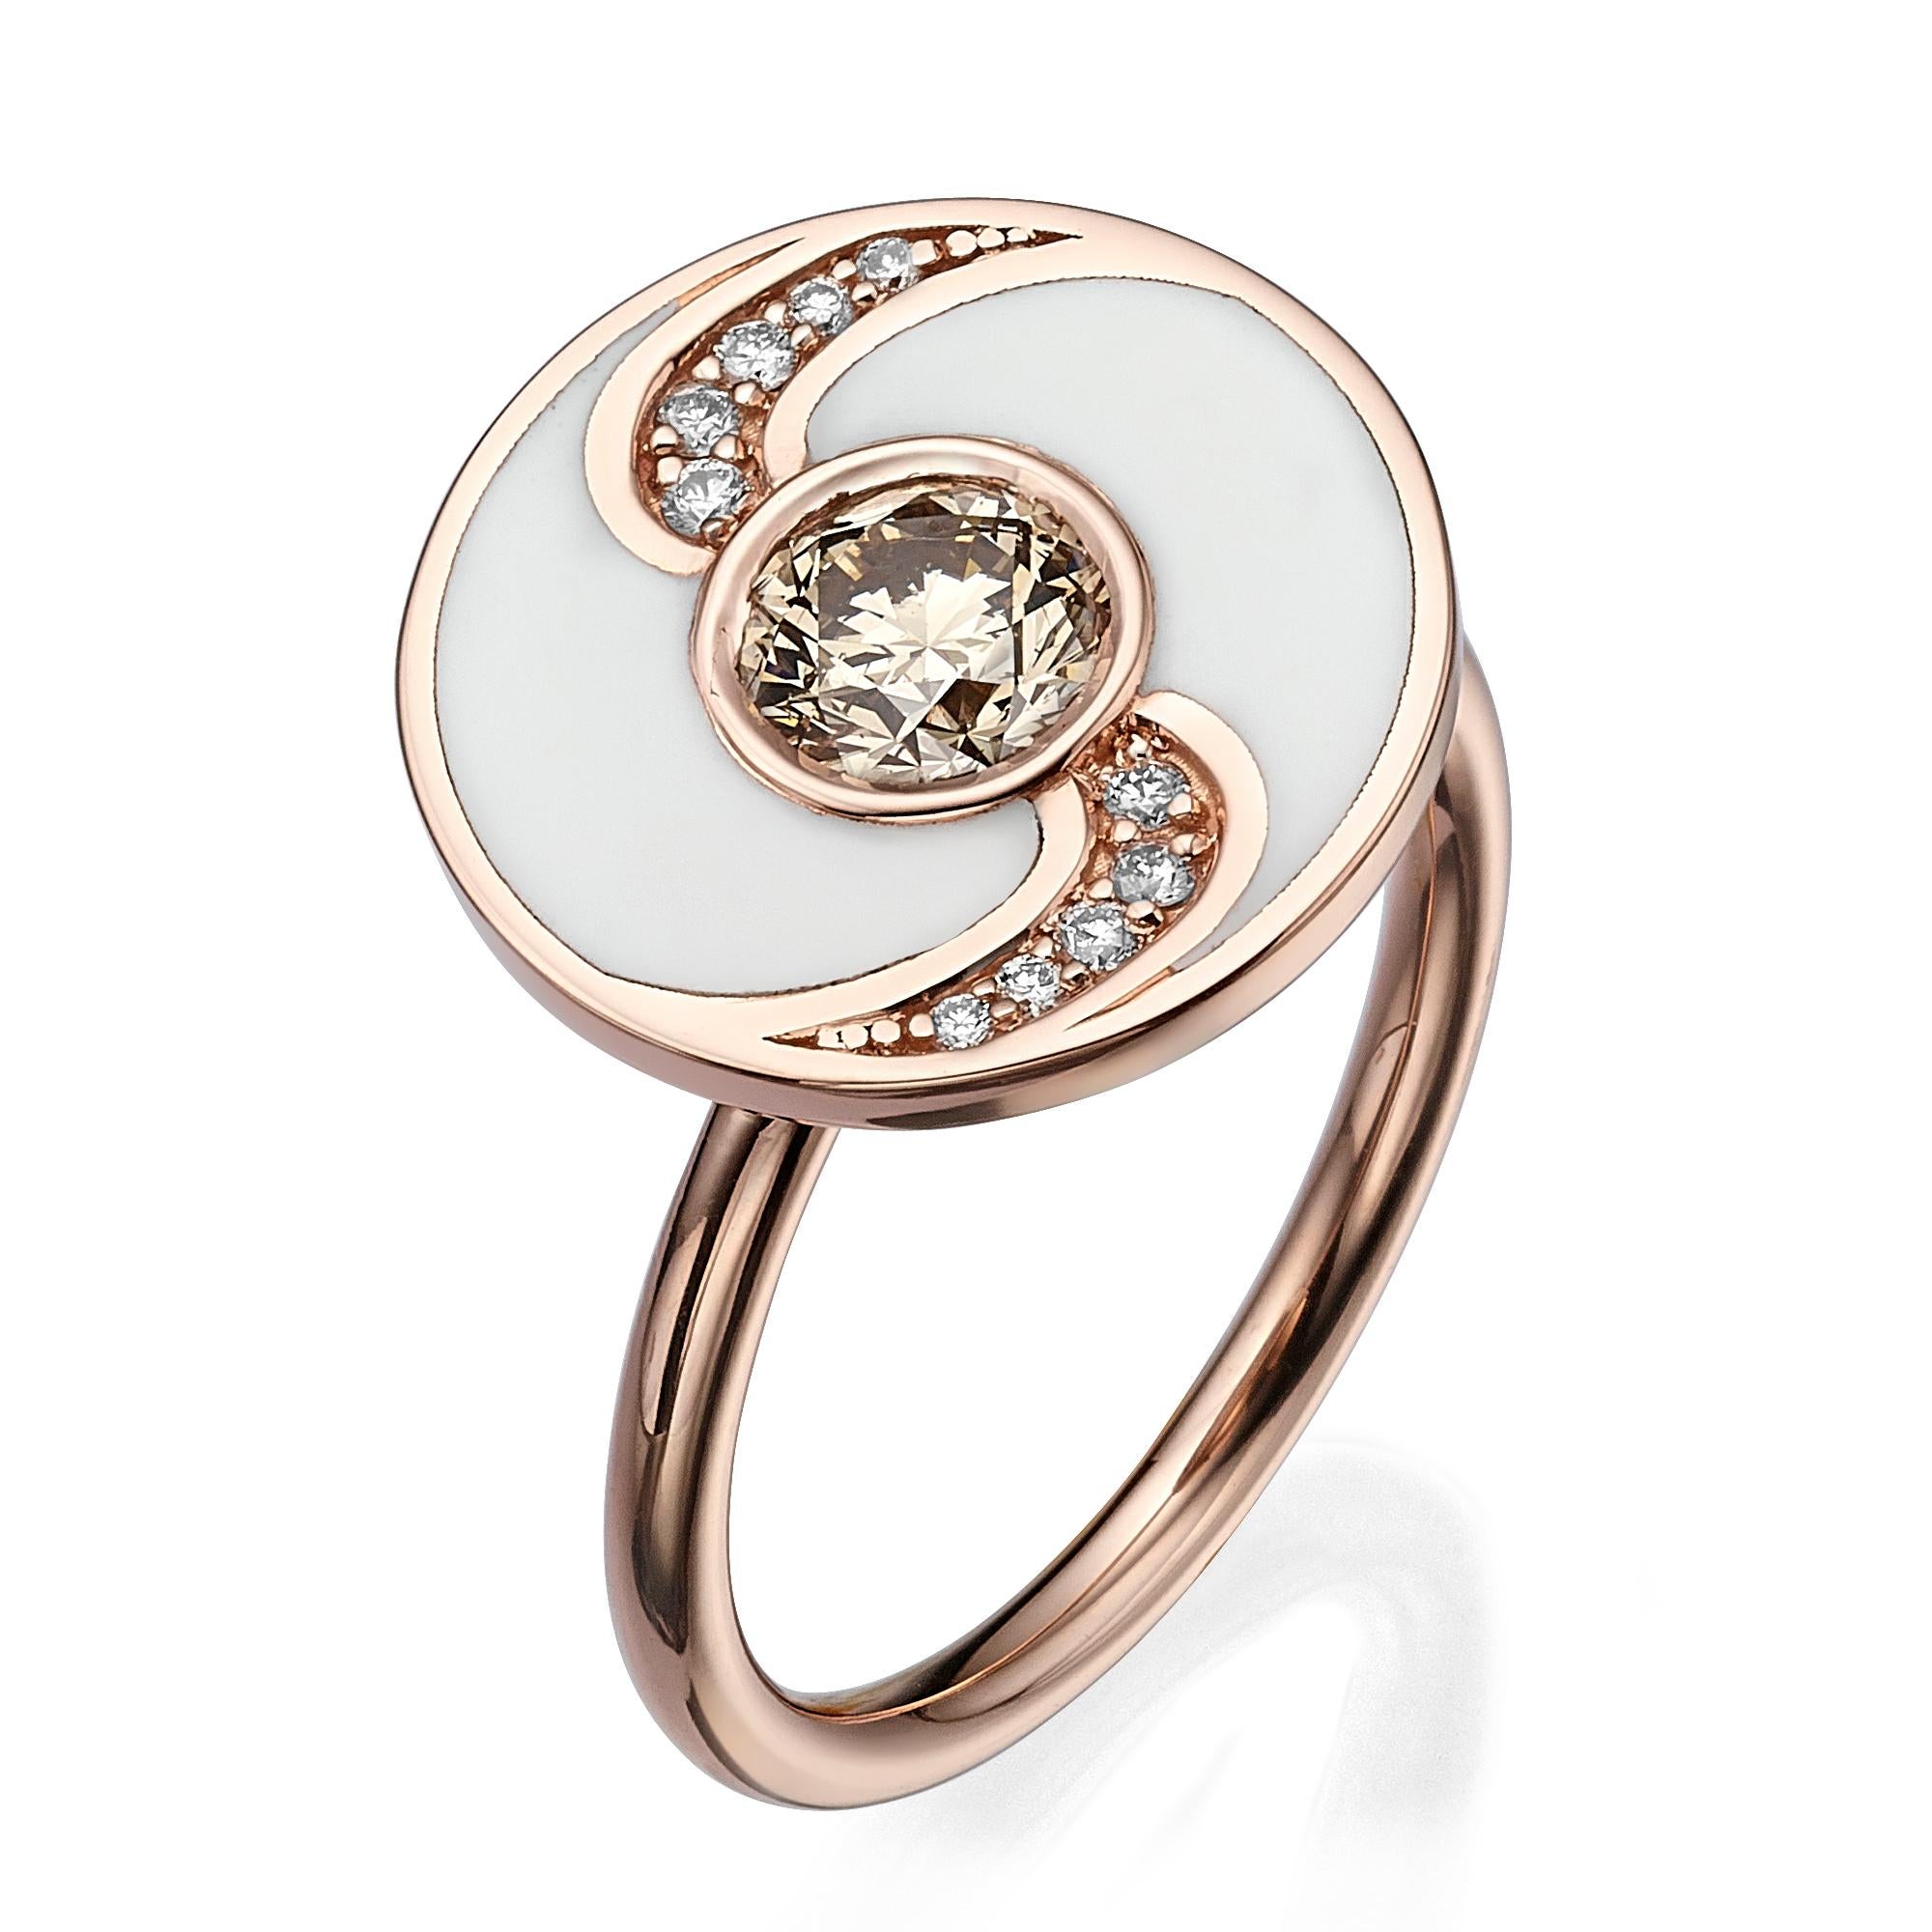 SKU# 4006106

A round shaped white enamel ring that exudes elegance and sophistication. The ring features a center Fancy Orangy Brown round SI1 diamond that weighs 0.73ct and is complemented by 10 additional diamonds that have a total weight of